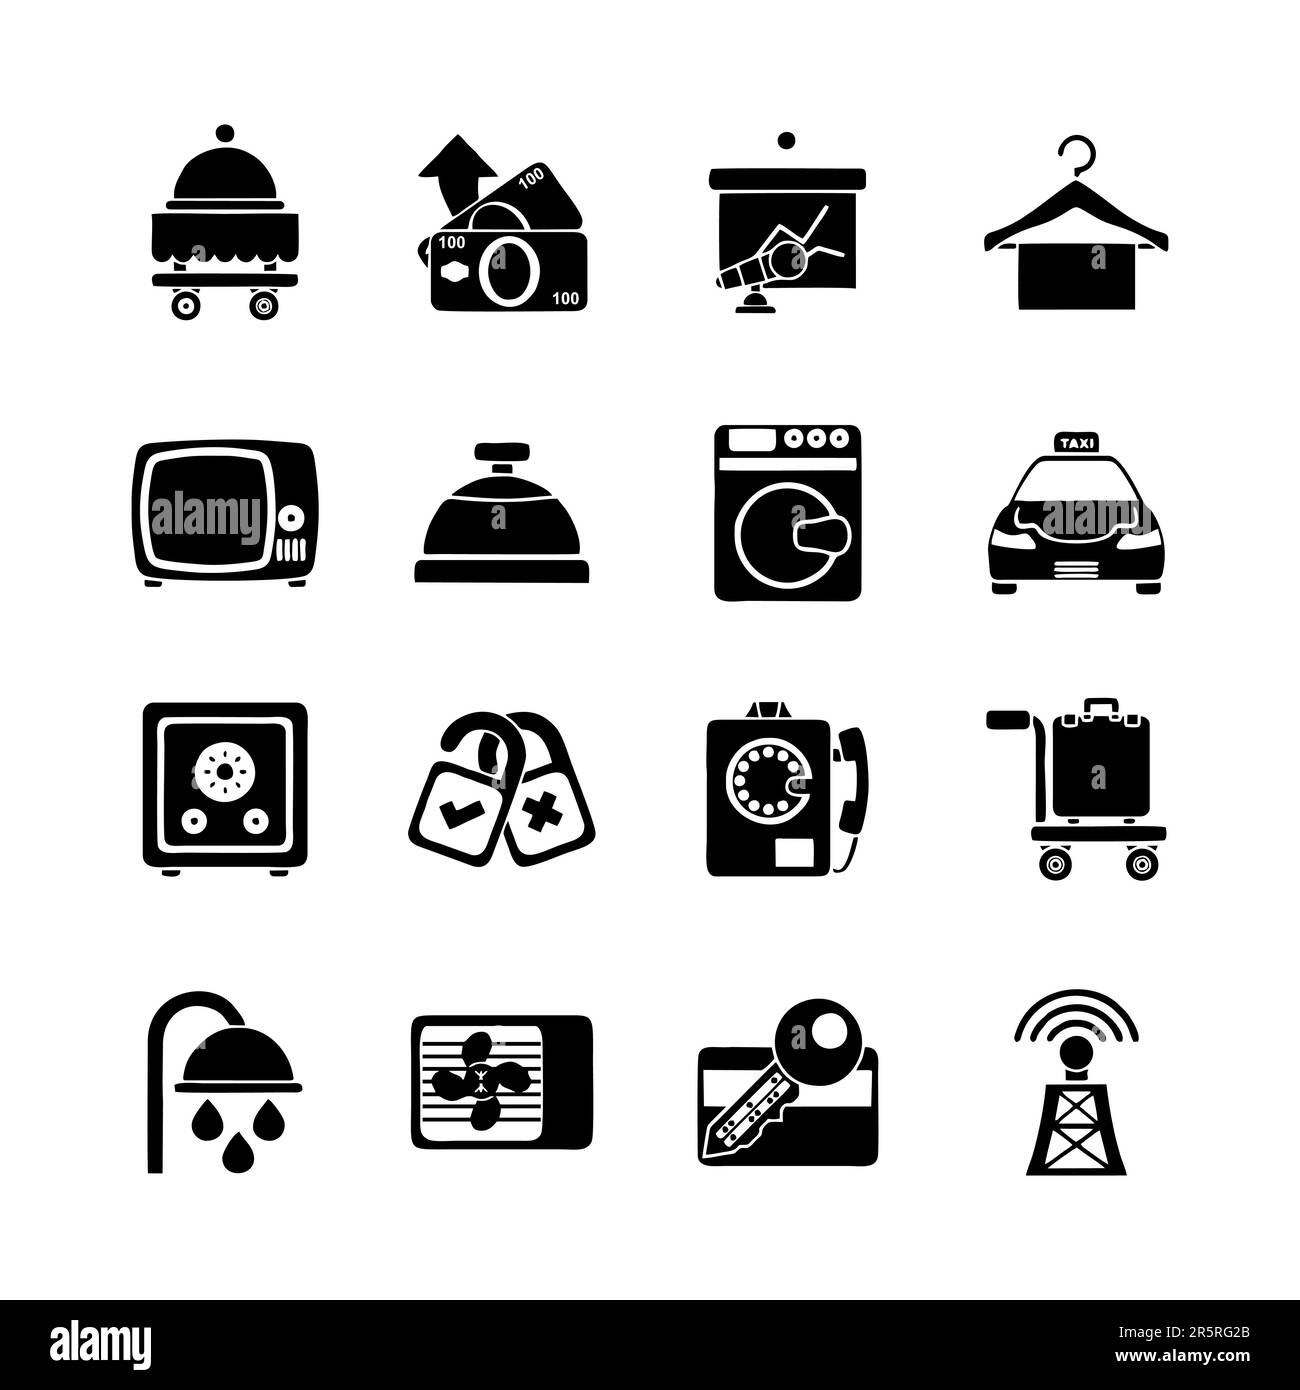 Hotel facilities, hotel services line icons se Stock Vector